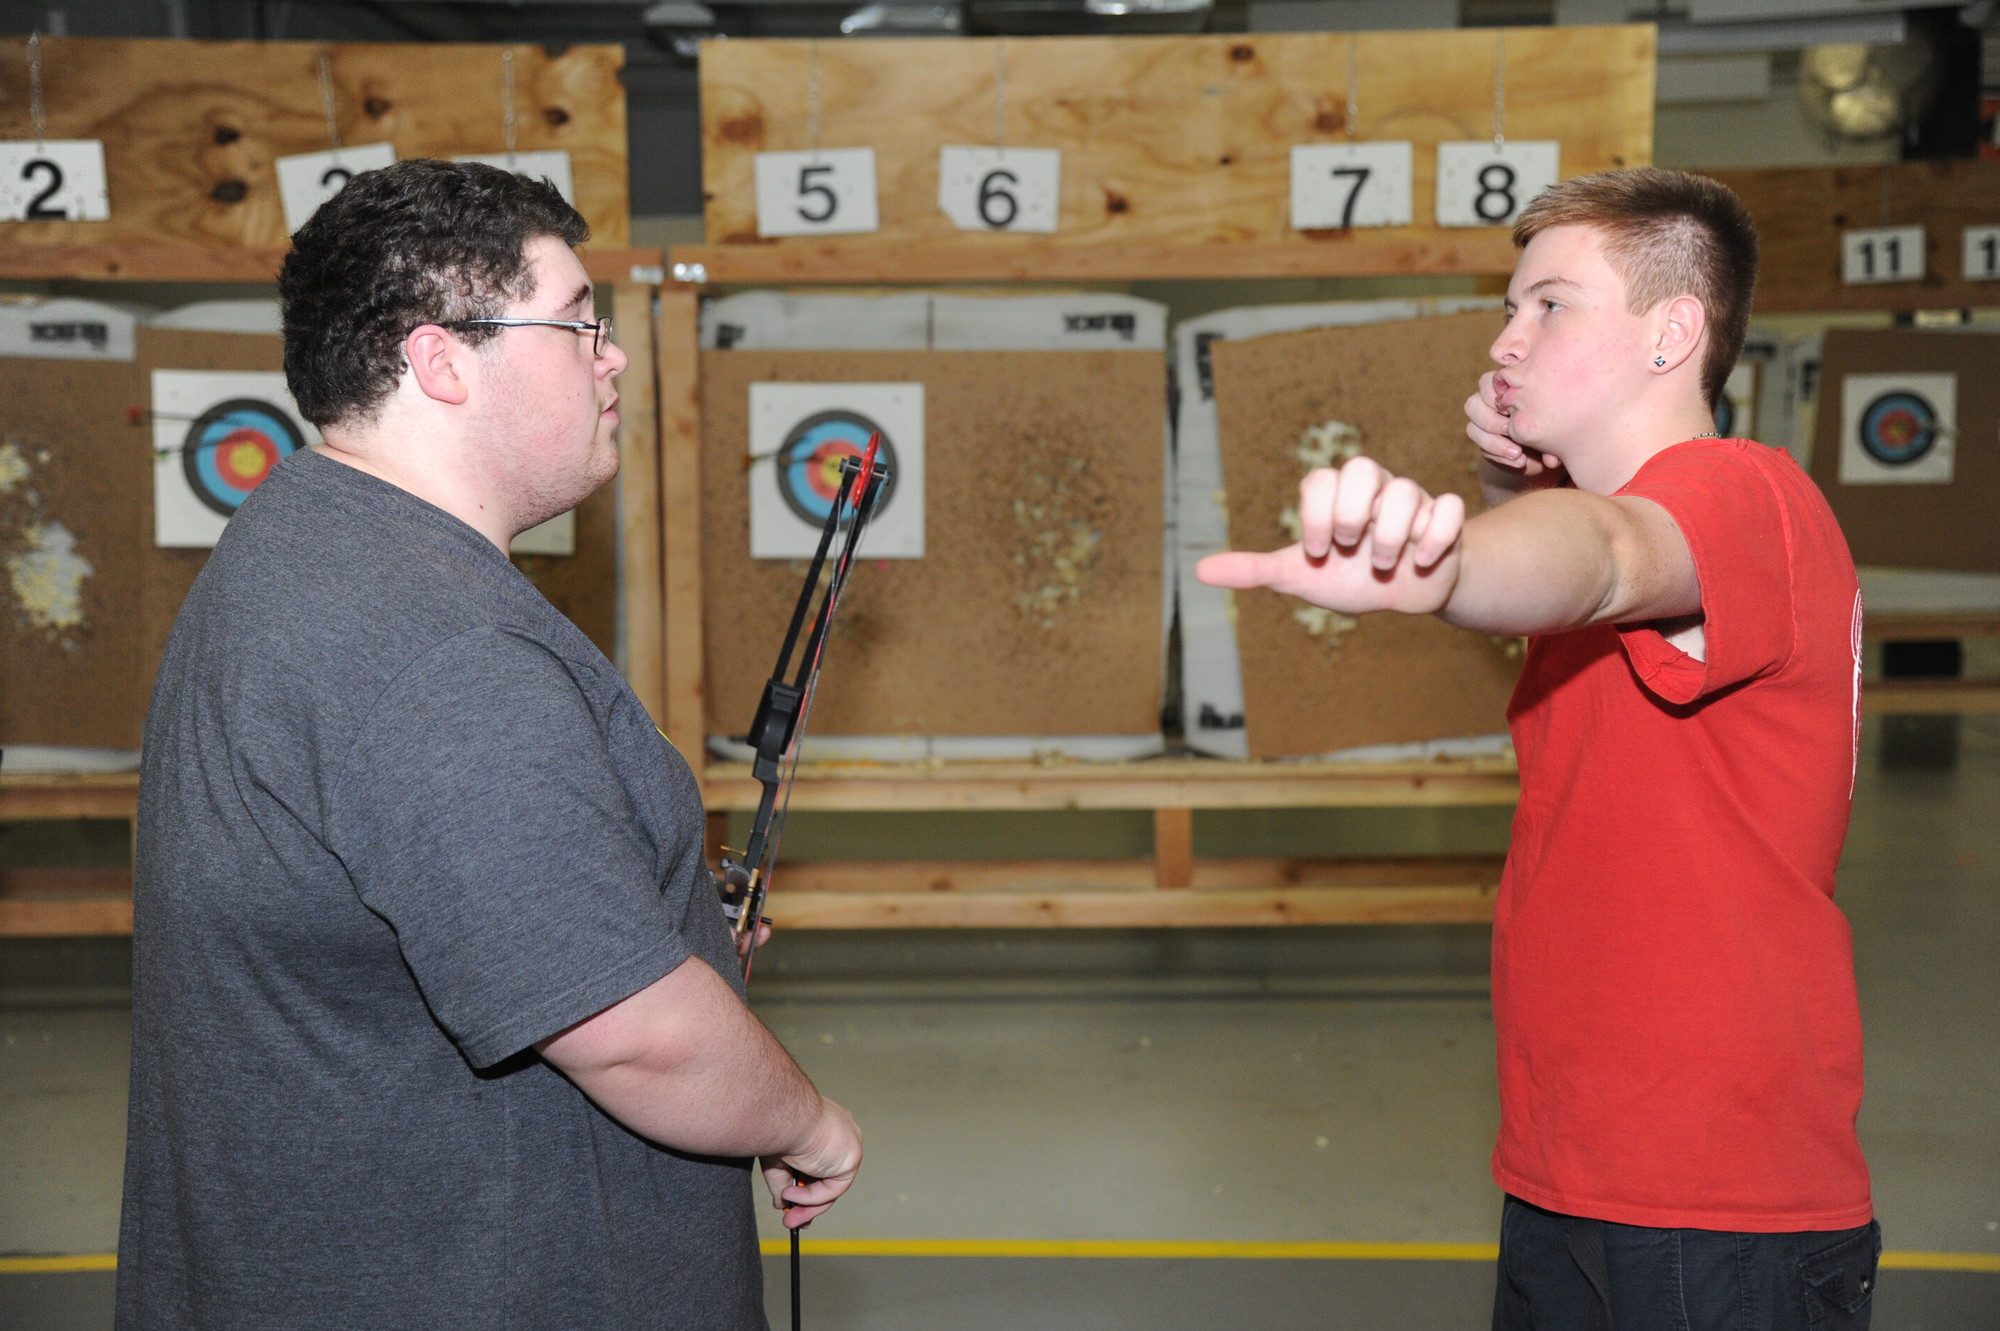 after learning the basics from instructor Tyler Weinman, of C&B Archery in Hicksville, Freedman said the experience of shooting an arrow gave him an adrenaline rush.